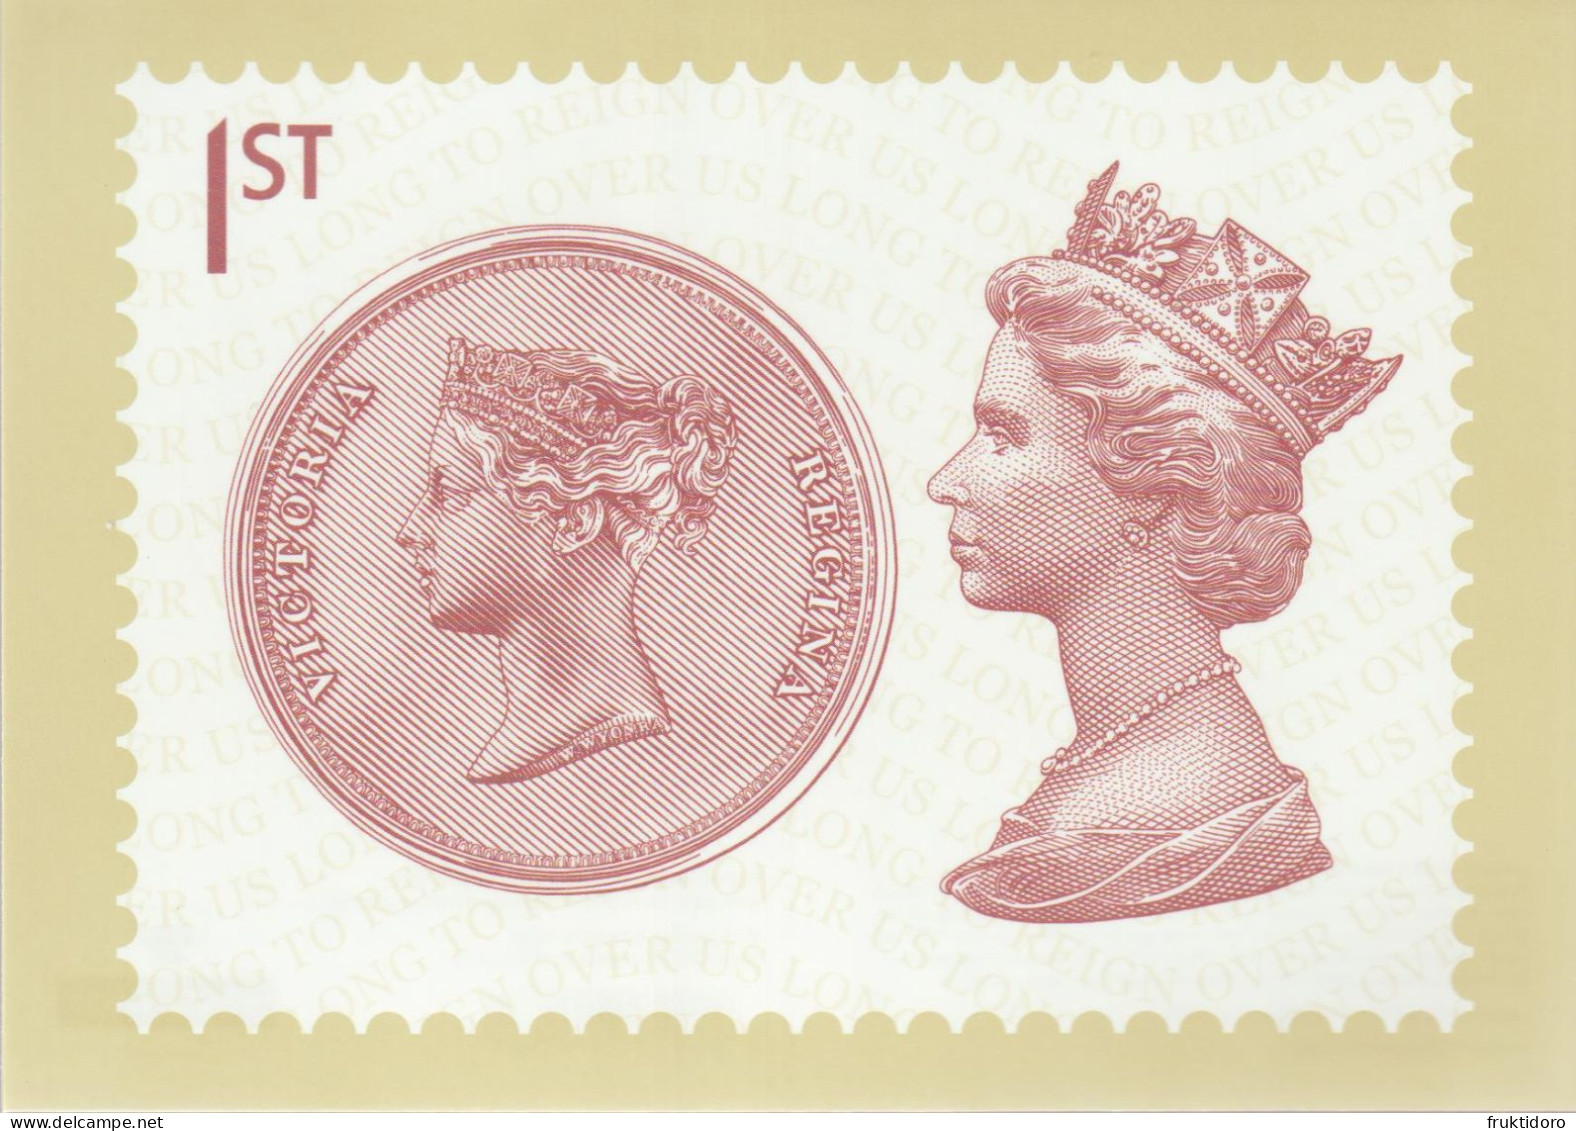 United Kingdom Postcards 2015 About Stamps In Mi Block 96 Queen Elizabeth II - Long To Reign Over Us ** - Collezioni